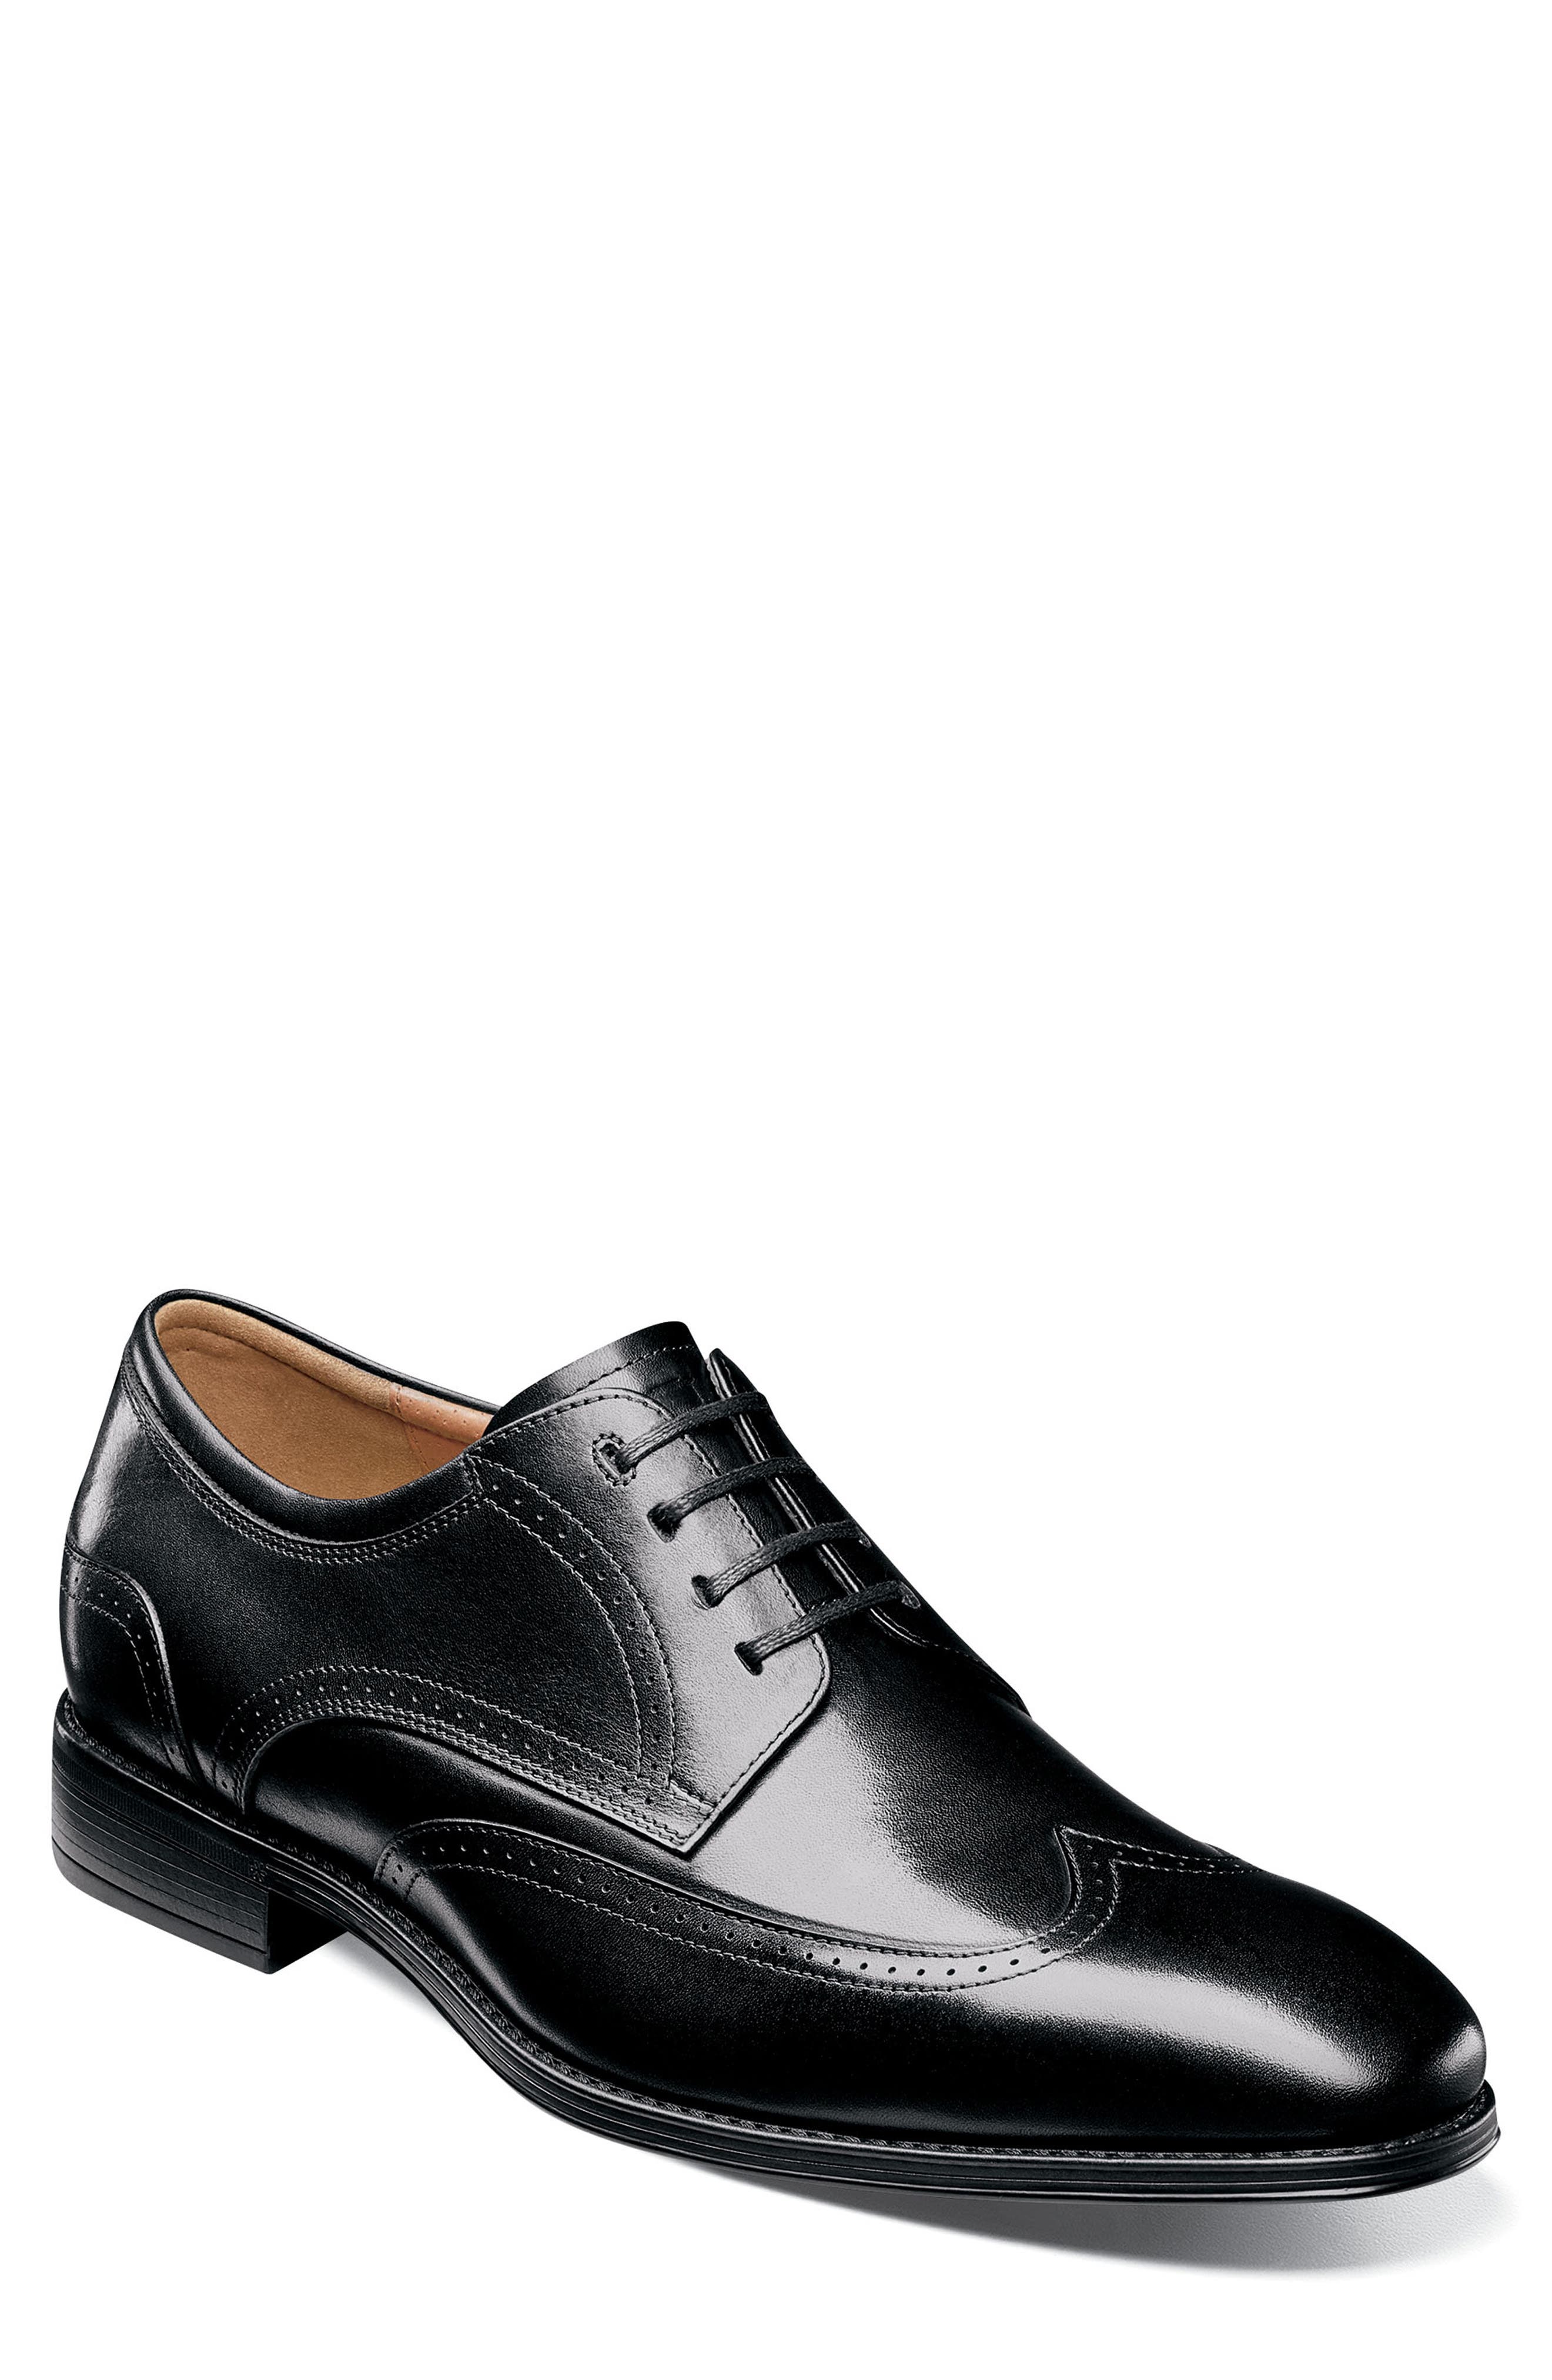 Florsheim - Men's Casual Fashion Shoes and Sneakers